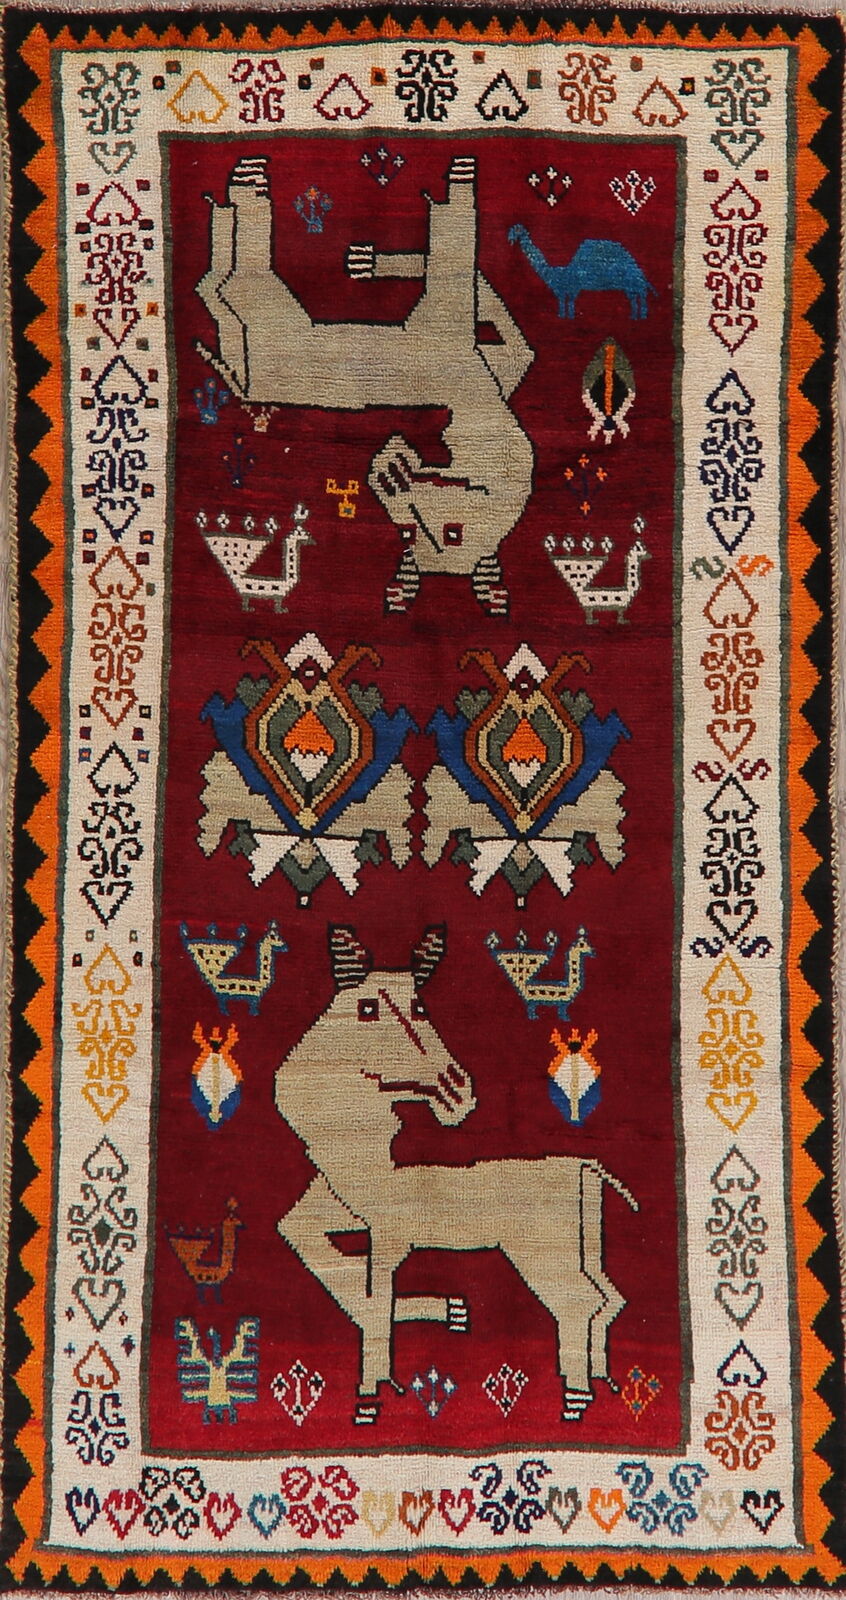 Animal Pictorial Gabbeh Oriental Area Rug 4x8 Wool Hand-Knotted Childrens Carpet